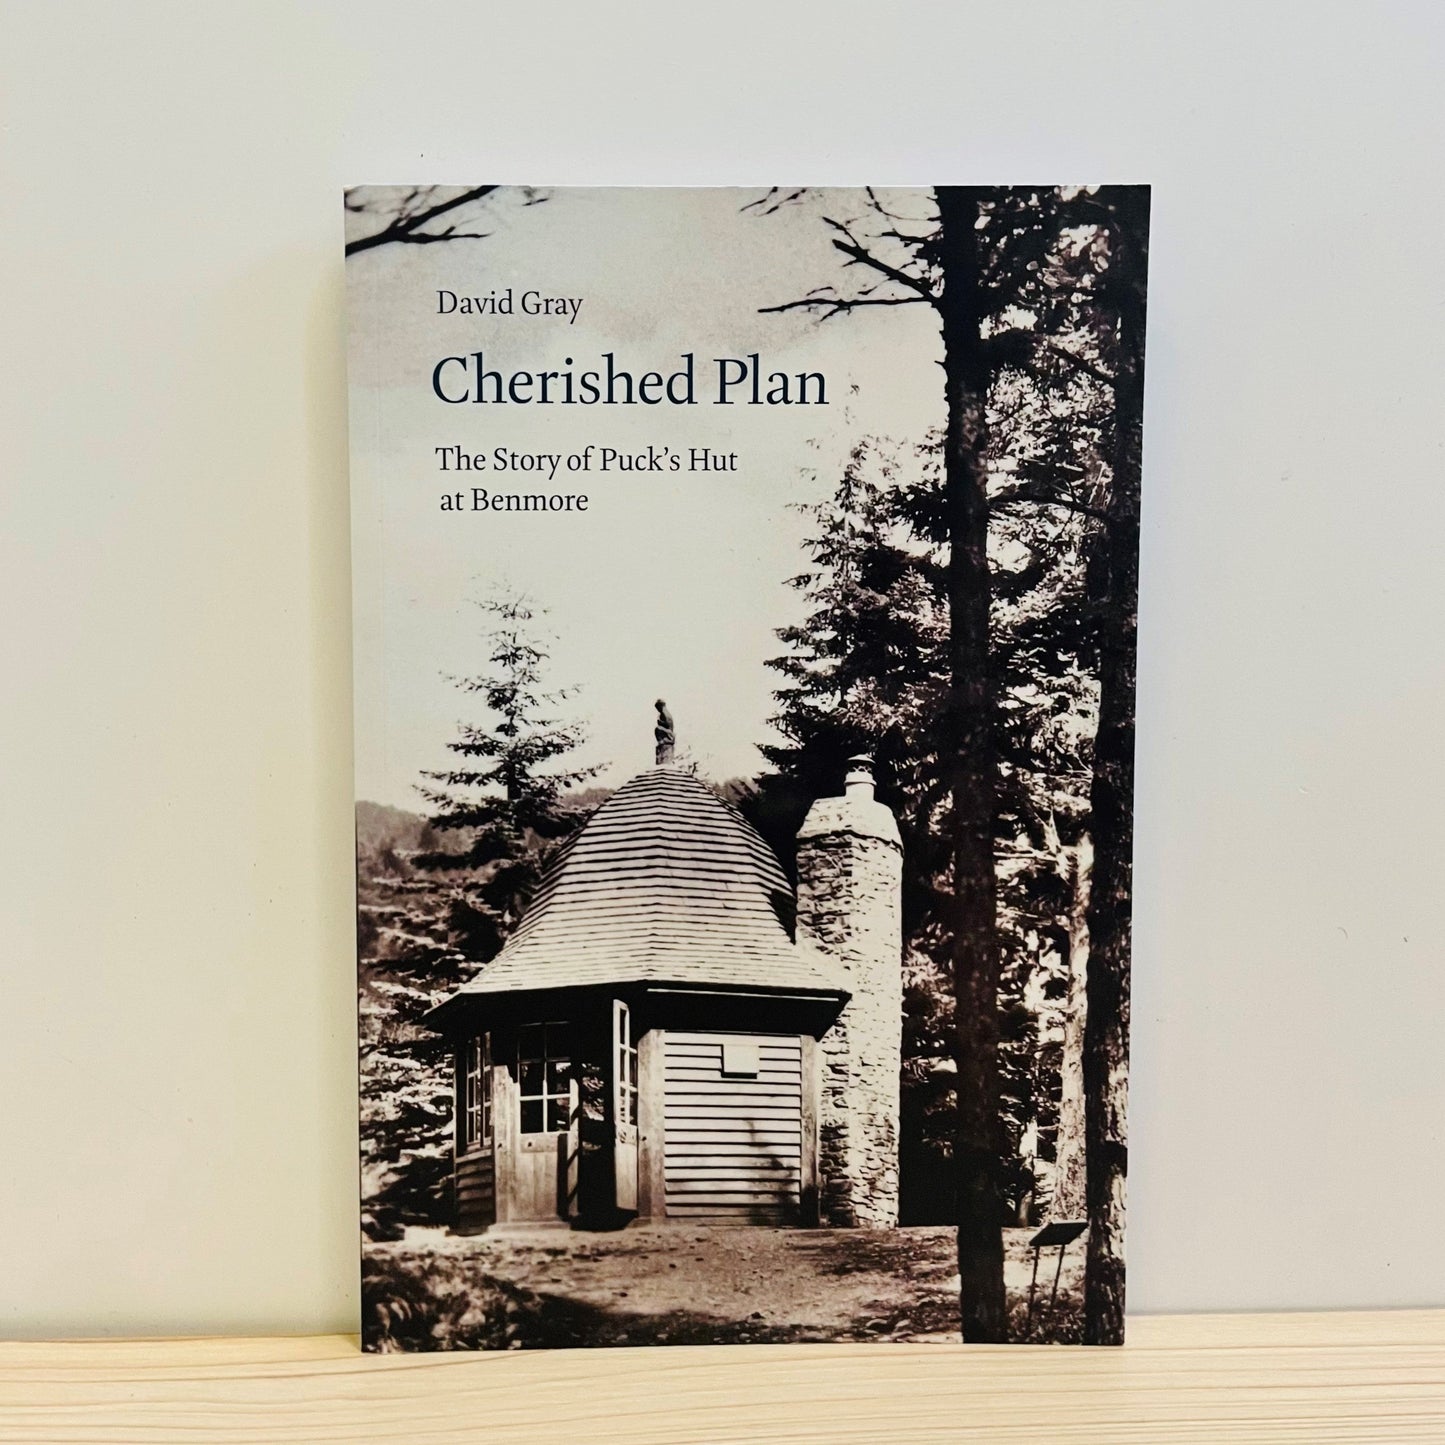 Cherished Plan: The Story of Puck's Hut at Benmore